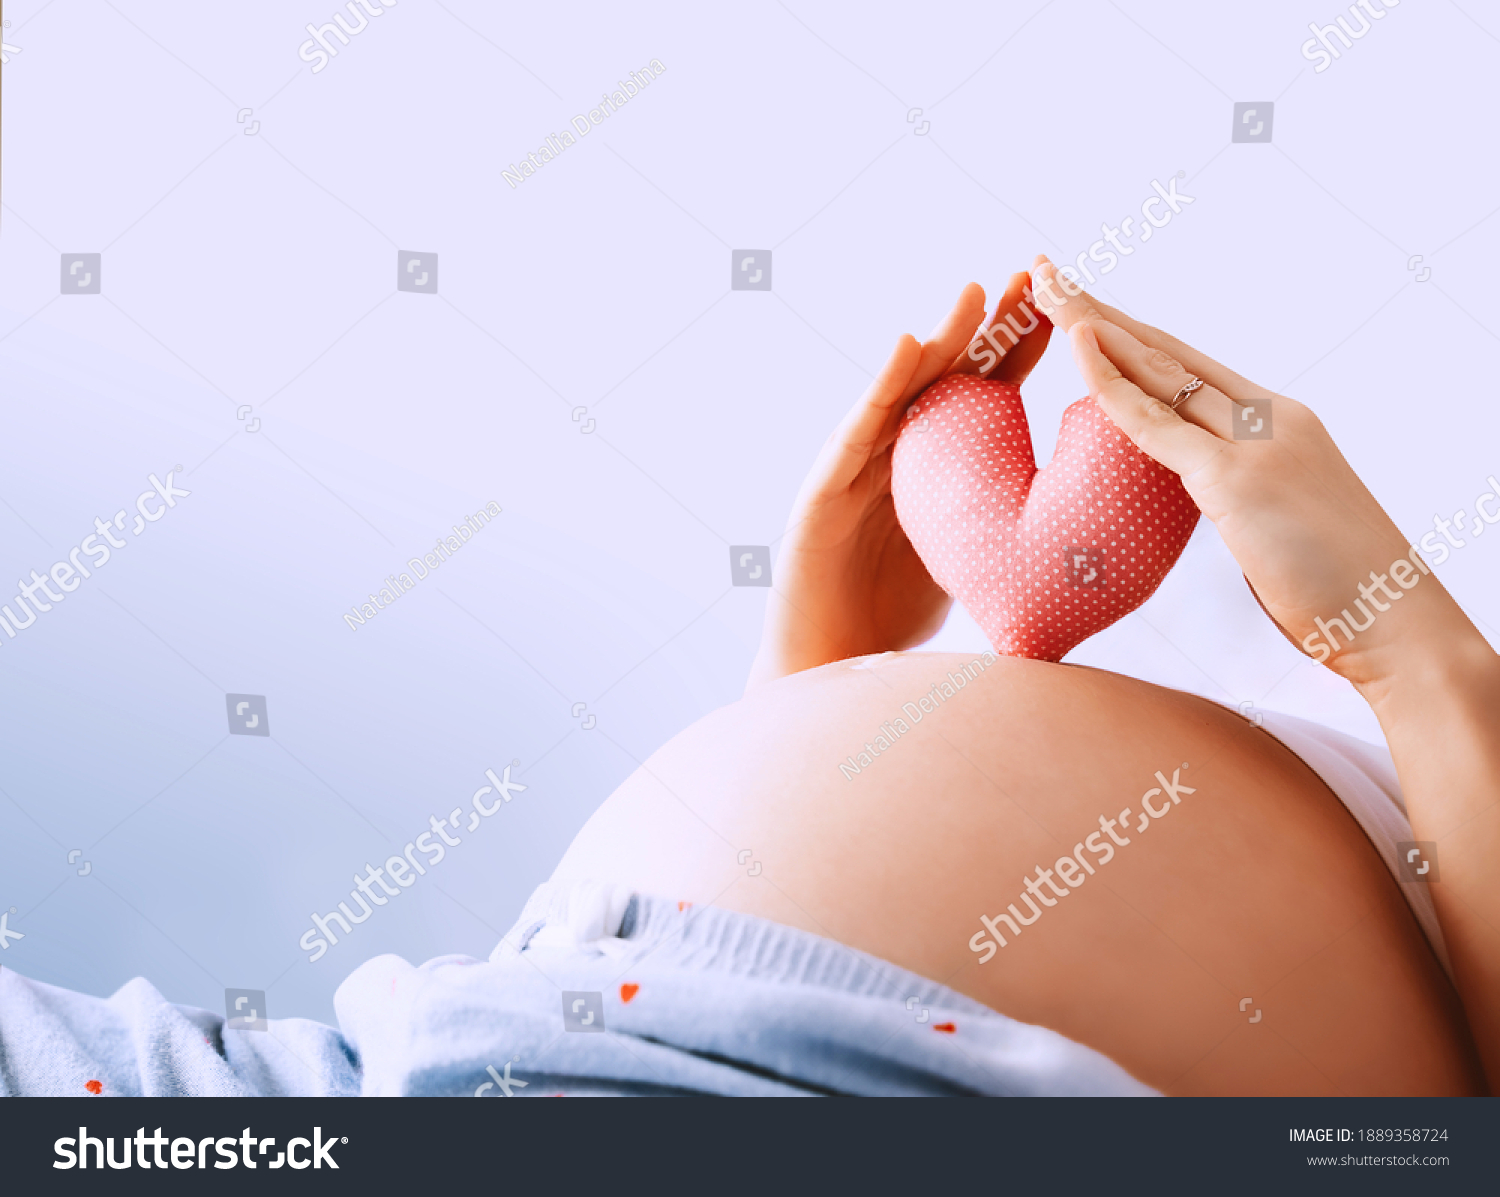 Pregnant woman holds in palms symbol in heart shape. Loving mom waiting of a baby. Concept of maternity, parenting, prepare and expect. Happy expectant mother during pregnancy. #1889358724